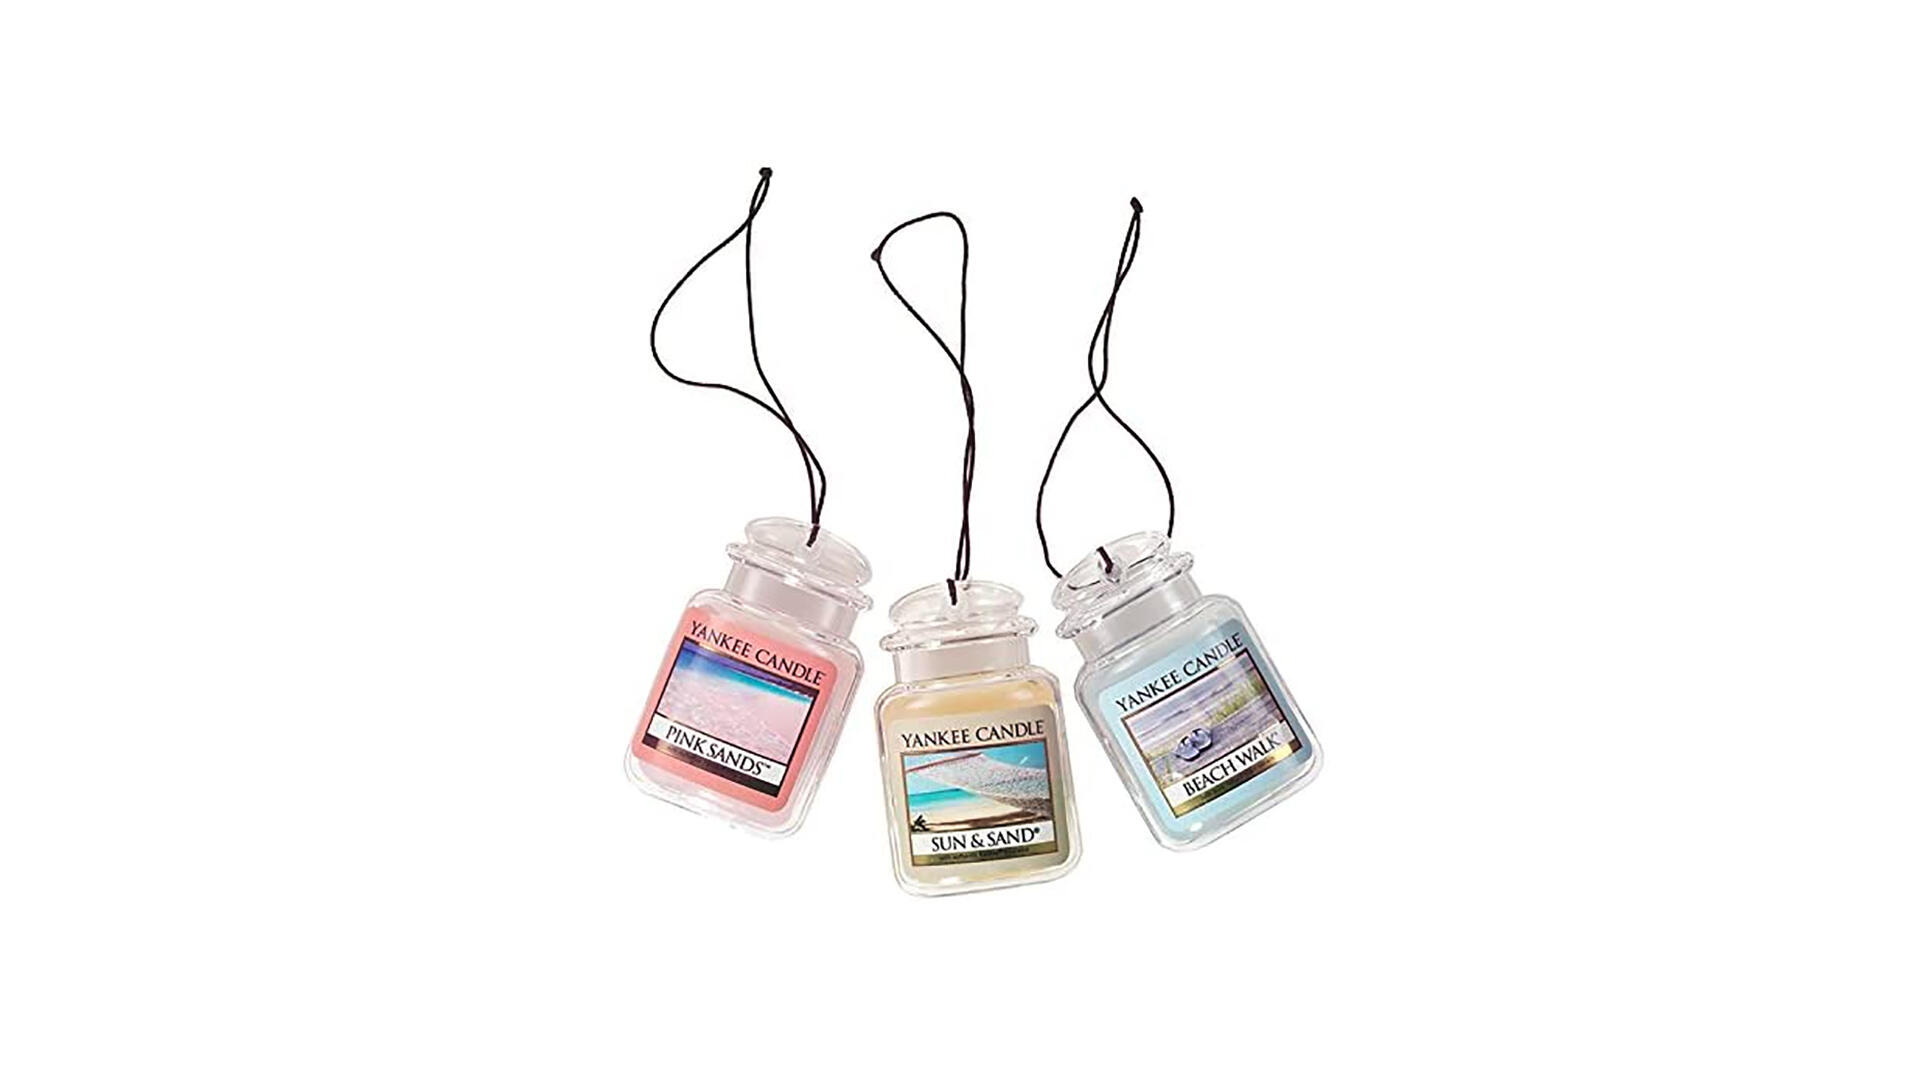 Yankee Candle Pink Sands Whole Home Air Freshener